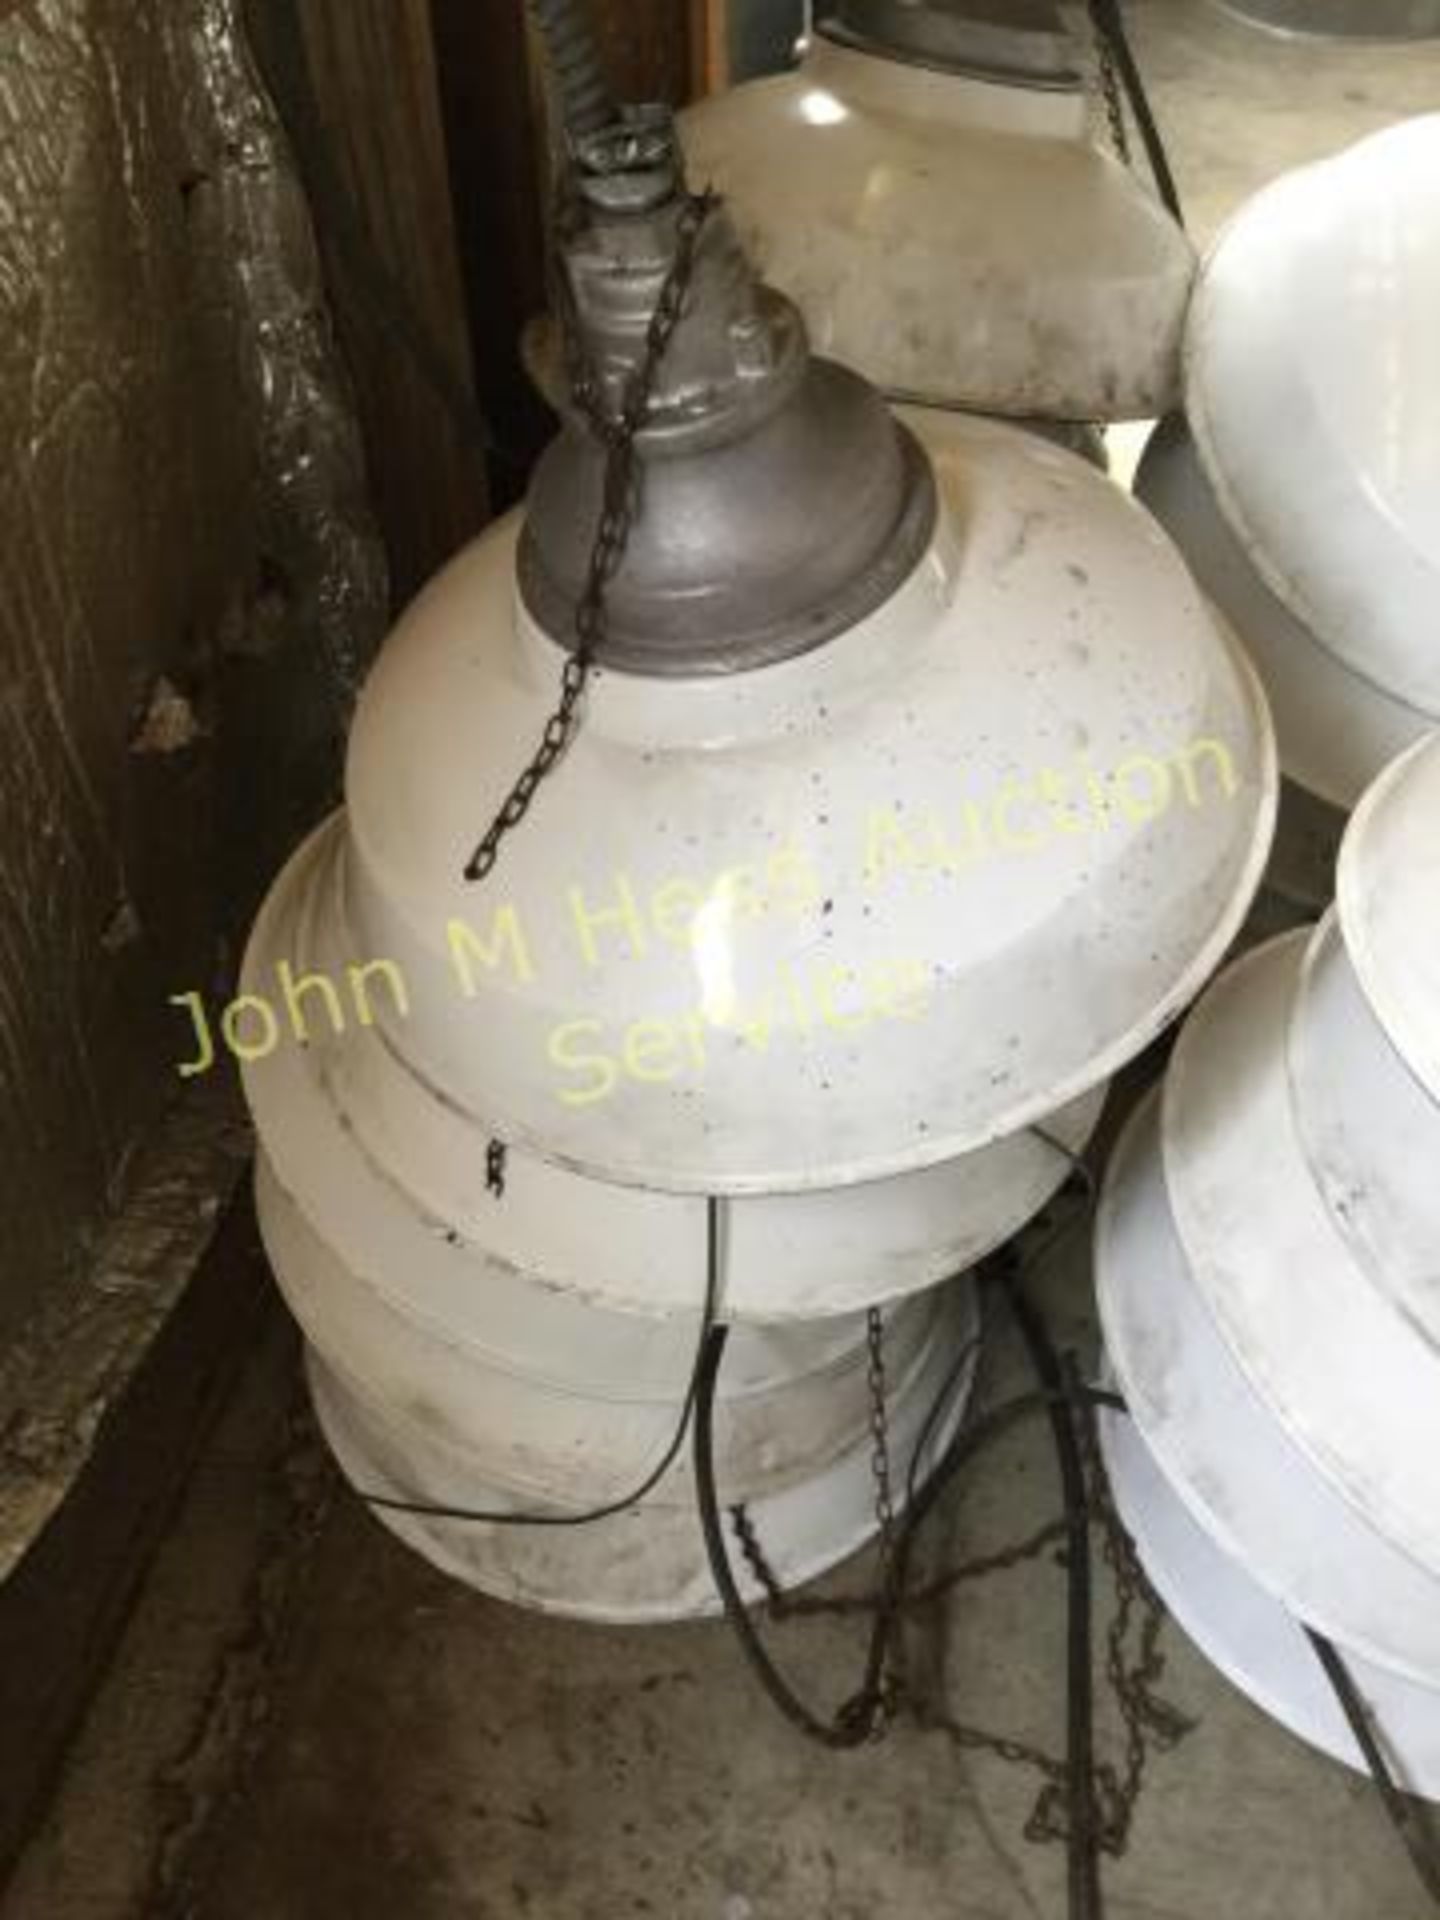 White Industrial Enalmeled Hanging Light Fixture Aprox 18in D x 16in H. BTP take 5 - Image 2 of 2